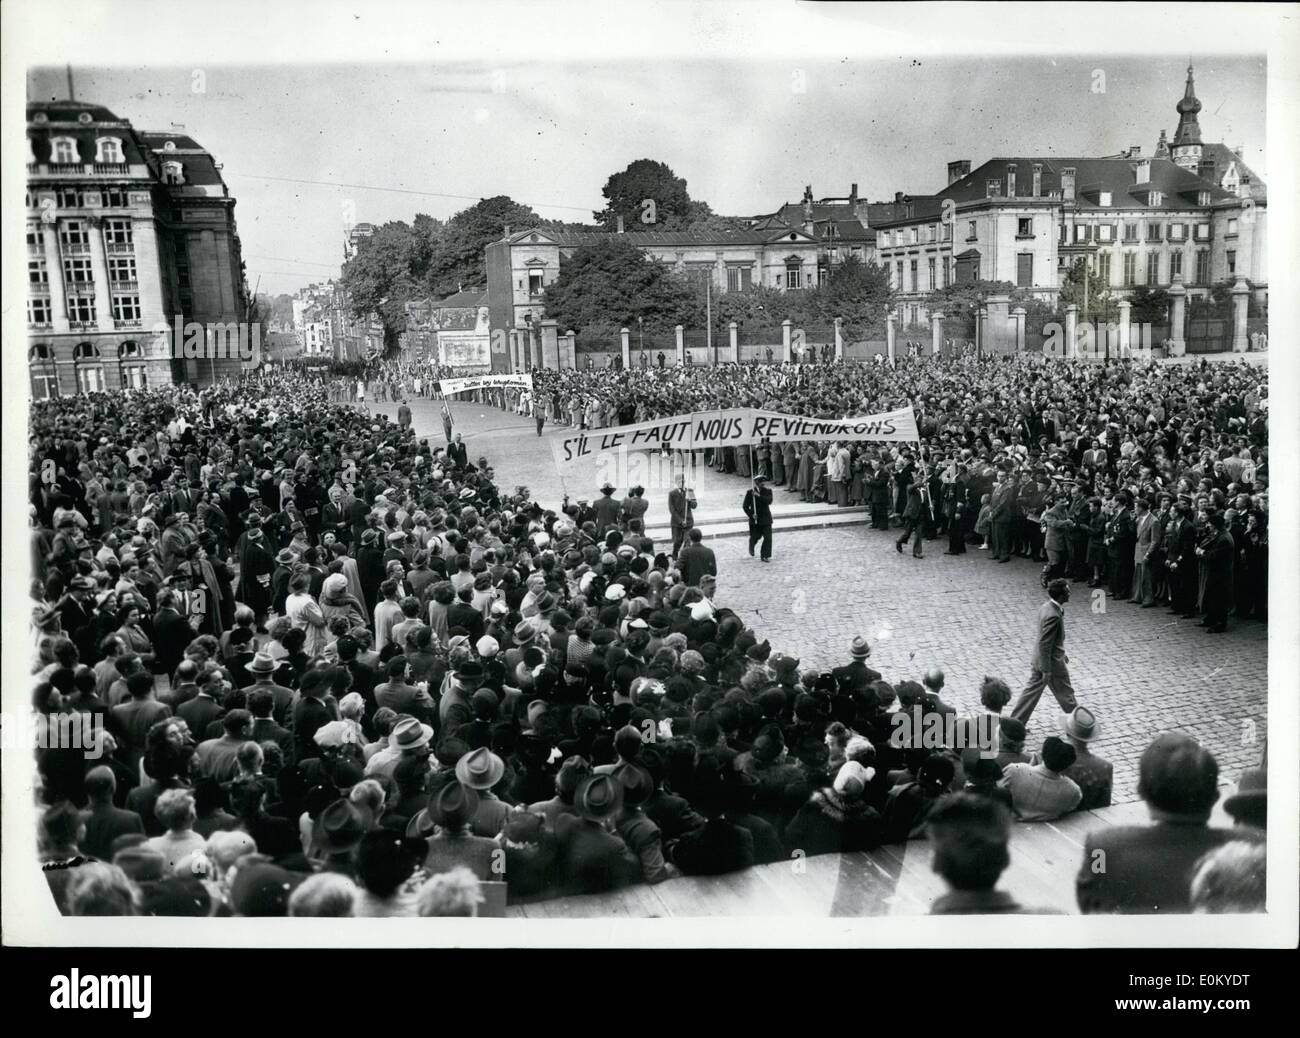 Sep. 09, 1952 - Grand National Concentration in Brussels; The committee for the Apeal to the Country to respect the justice against the reprieve granted to Debodt organised for the 14th of September this year a Grand National Protest Rally in Brussels according with all patriotic organisations from the First and Second World War in which took part the members of organisation representing mothers and wife of killed members of their families; all the political prisoners; Prisoners of War; invalids and ancient combatants; members of the resistance army etc Stock Photo